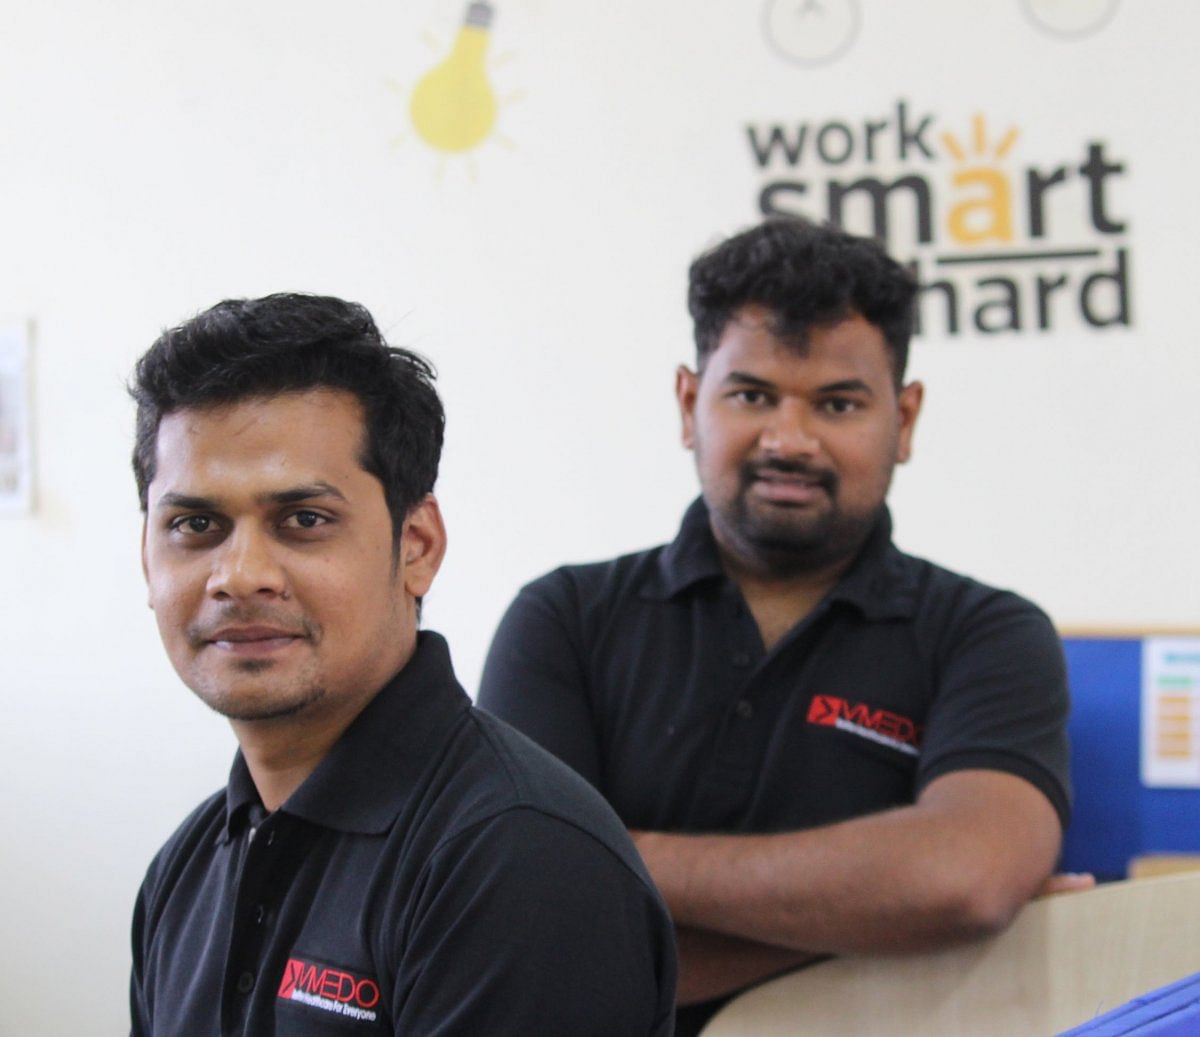 Co-founders Praveen (left) and Darshan (right)